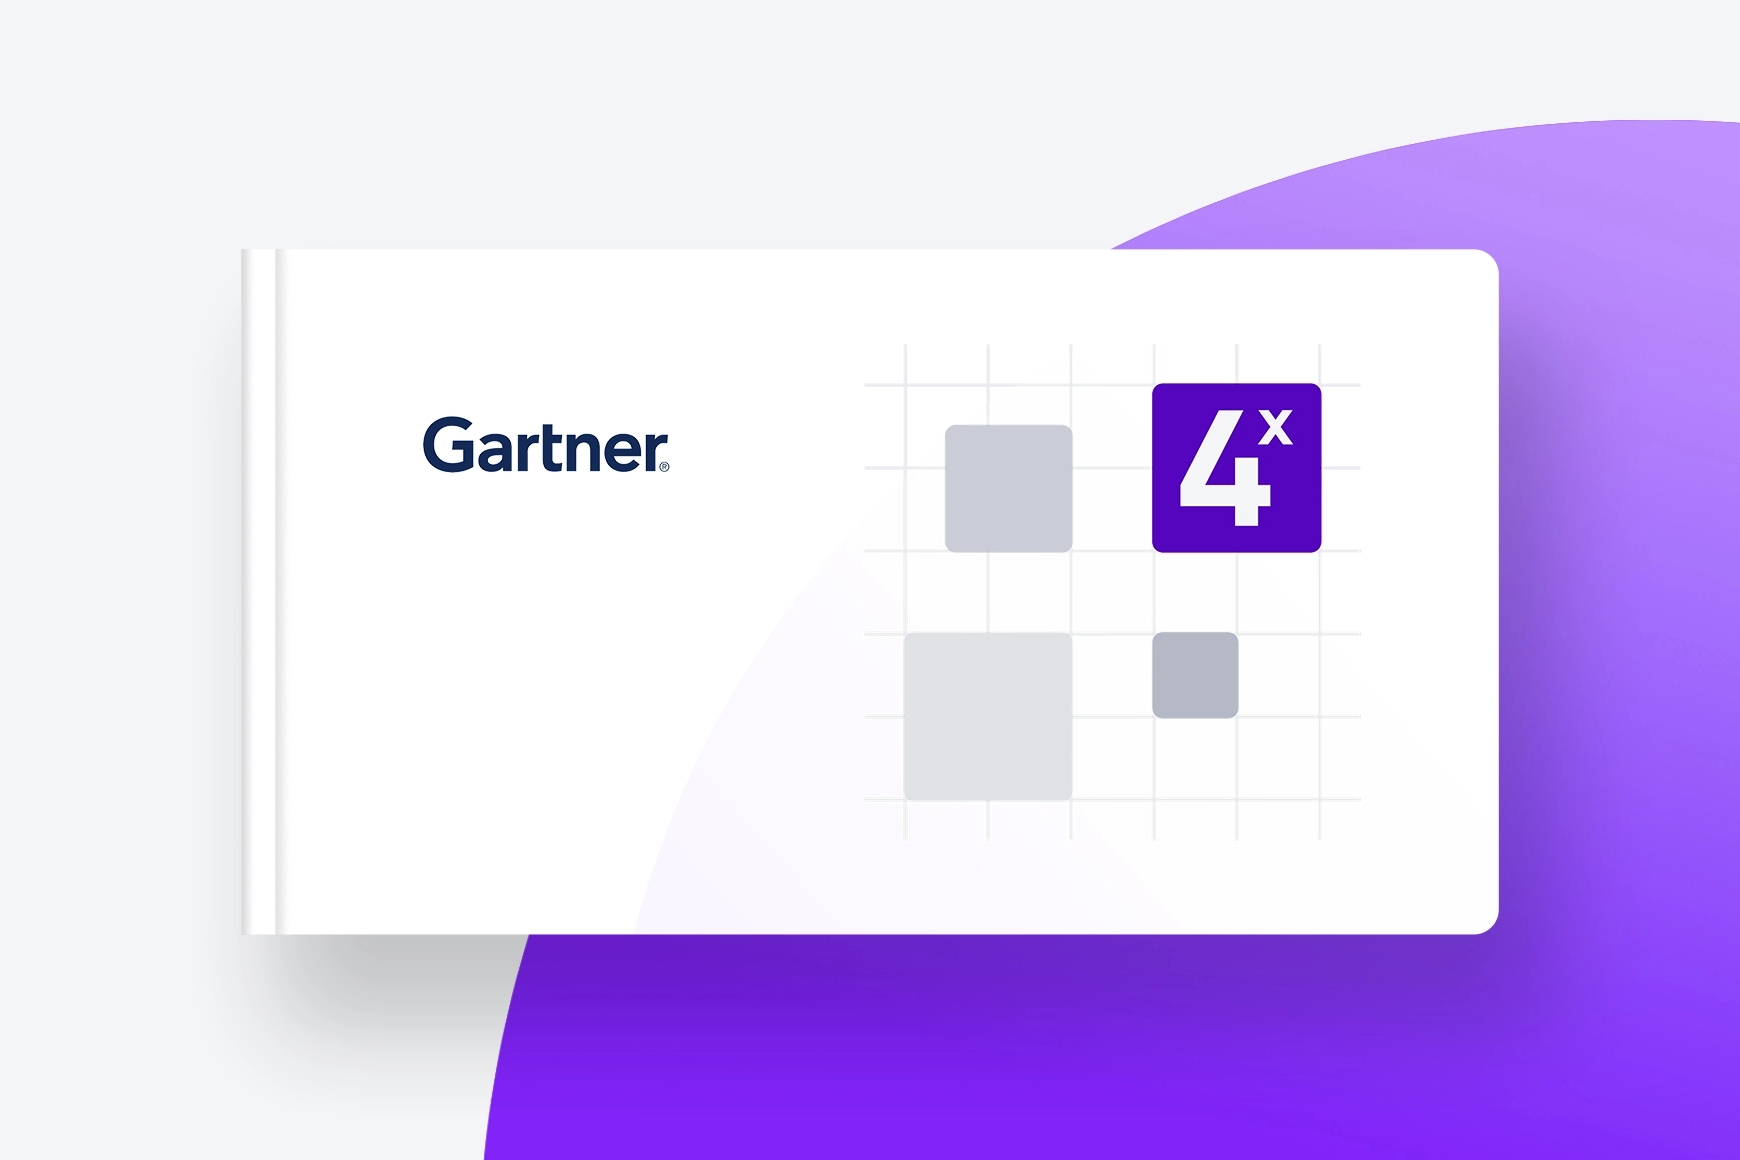 Talkdesk named as a Leader in Gartner® Magic Quadrant™ for Contact Center as a Service